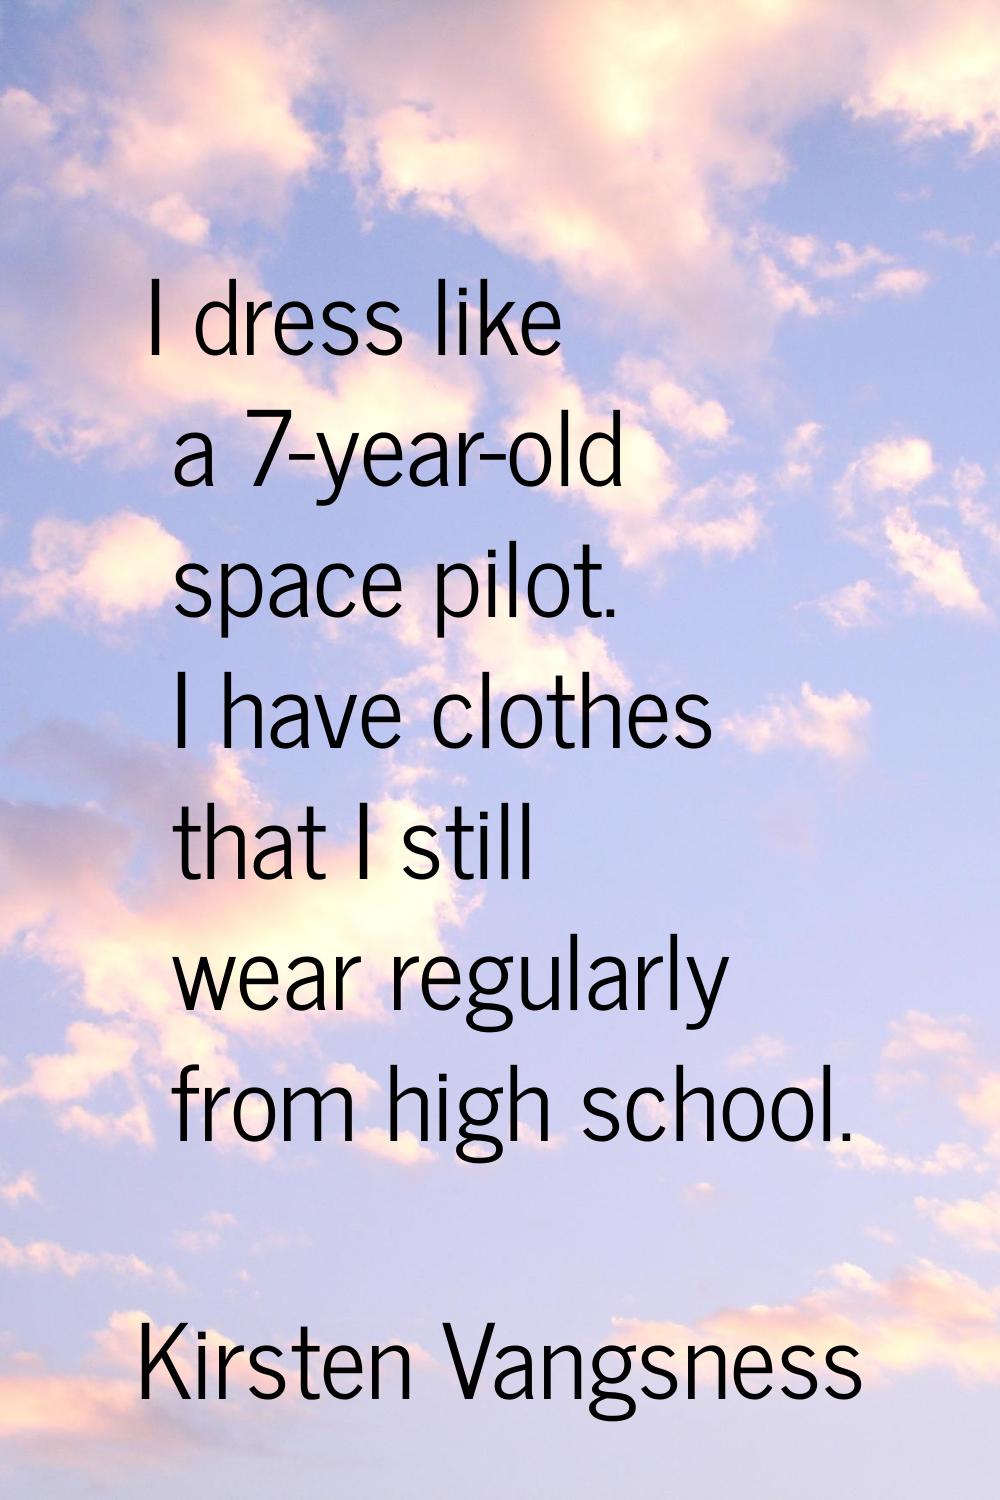 I dress like a 7-year-old space pilot. I have clothes that I still wear regularly from high school.